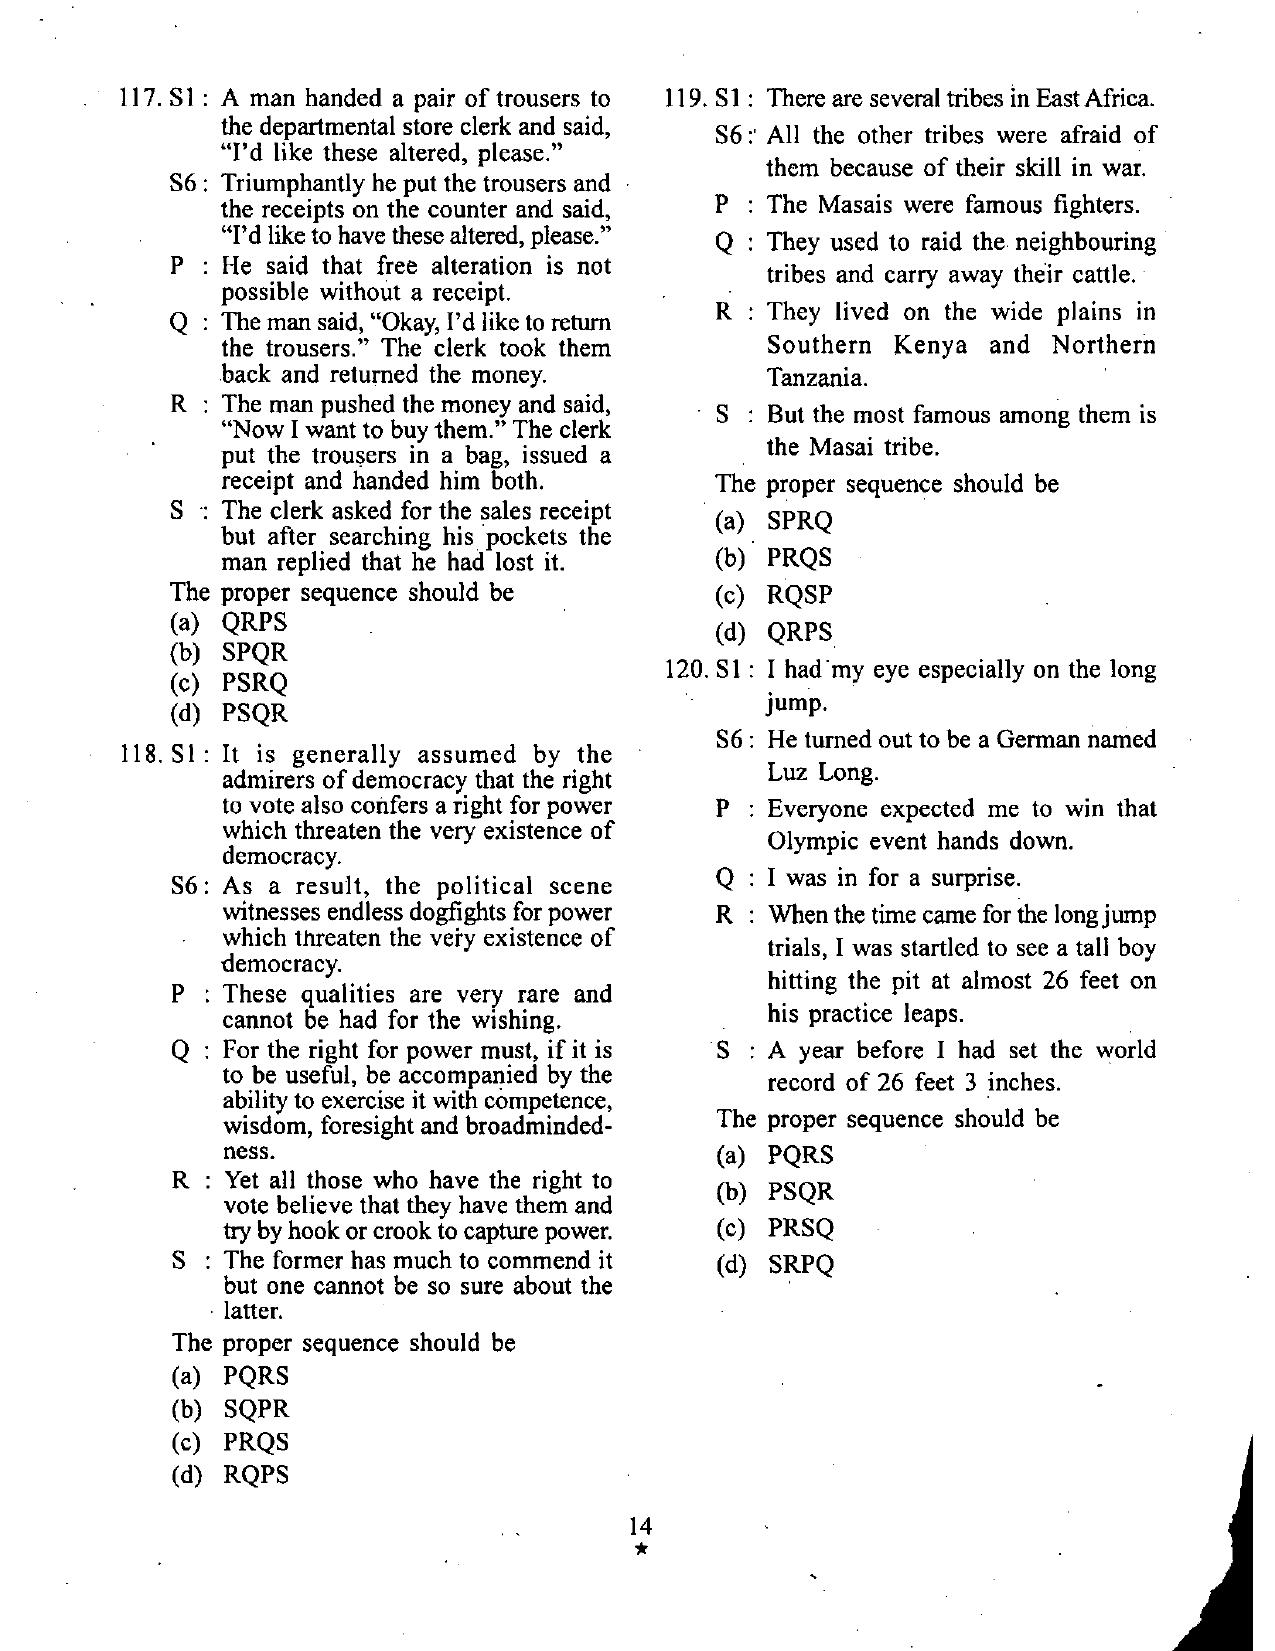 Jharkhand High Court Assistant Previous Year Question Paper - Page 14